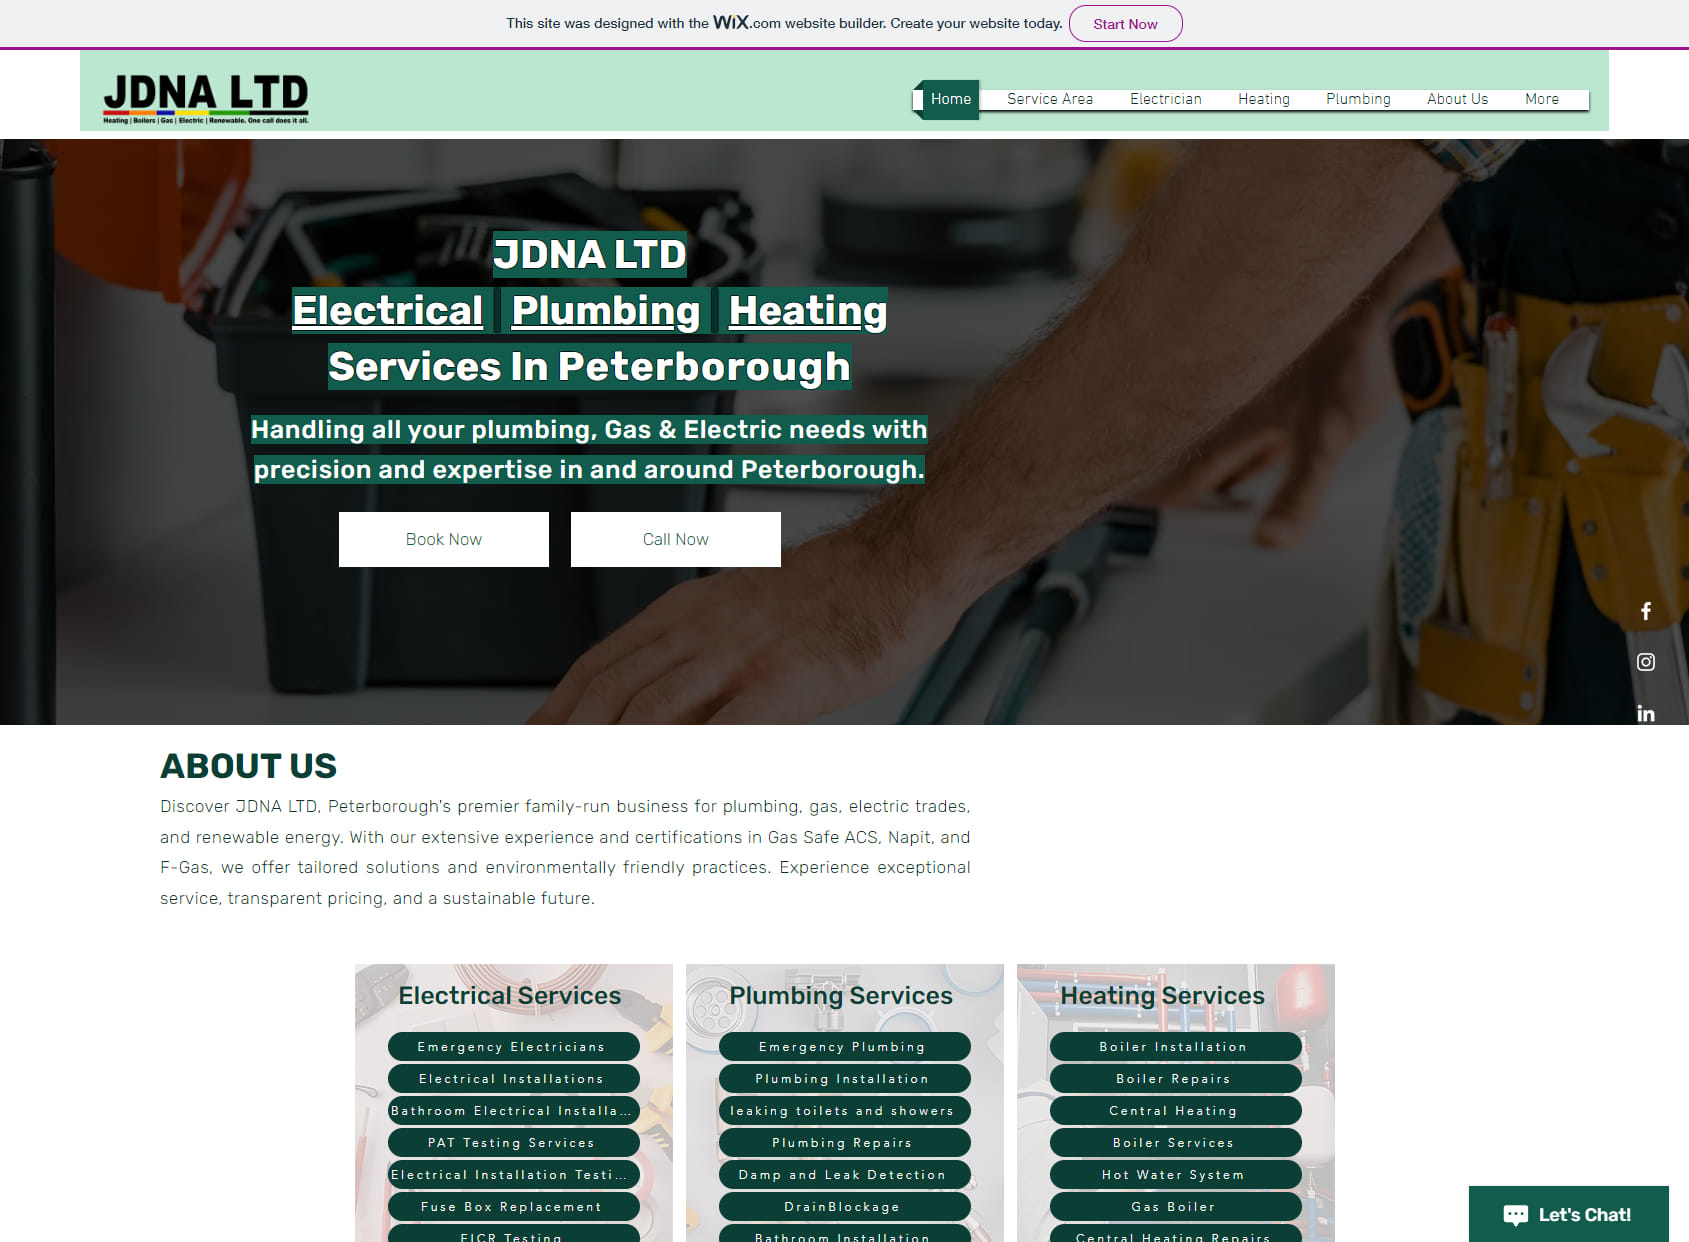 JDNA LTD Electrical, Plumbing & Heating Services